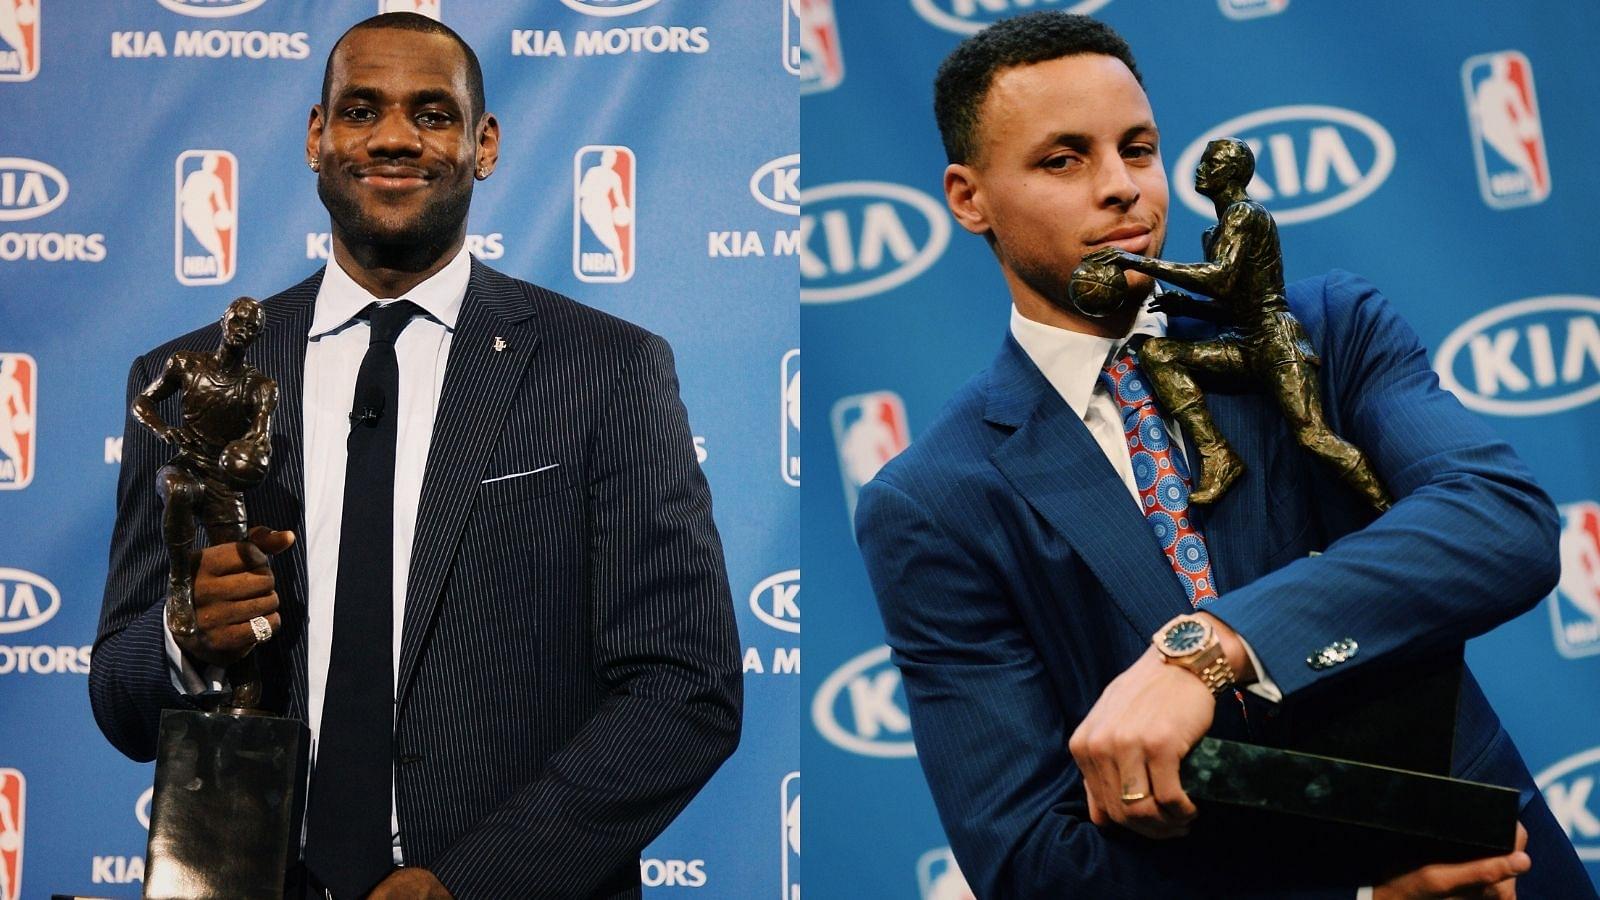 "2013 LeBron James vs 2016 Steph Curry": NBA Reddit brings up the comparison of primes of Lakers and Warriors superstars